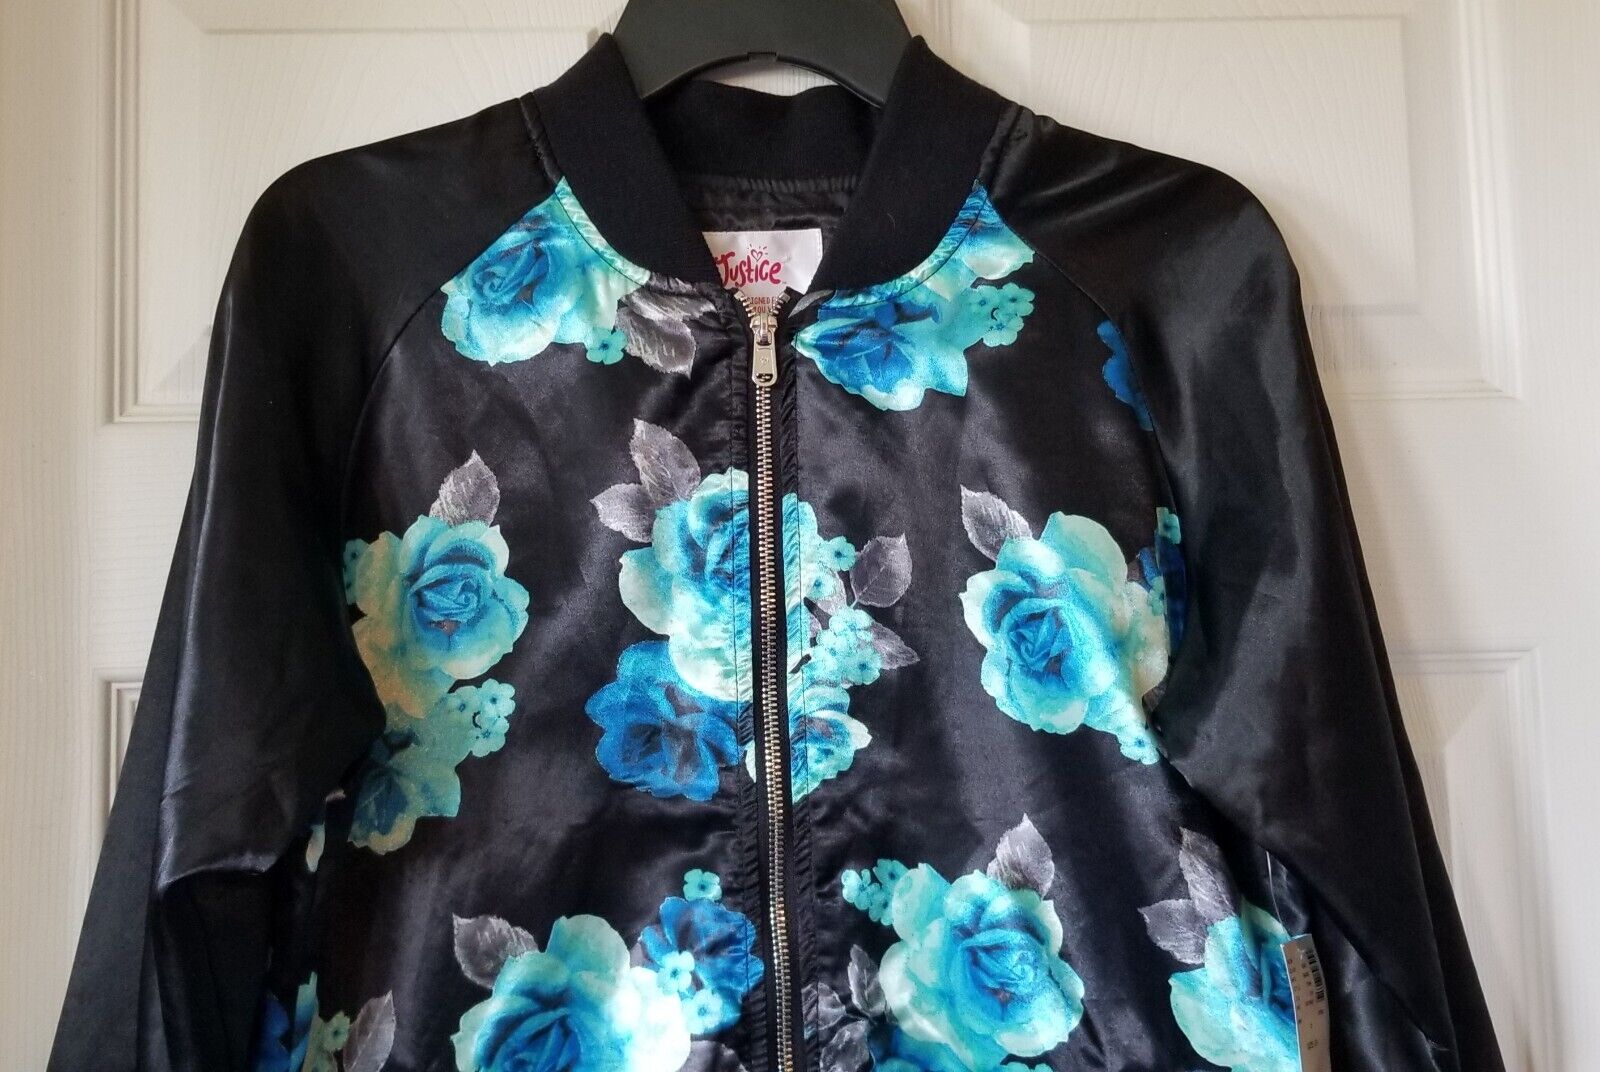 JUSTICE Girls Black and Teal Floral Satin Zip Front Bomber Jacket Size 20 - NWT Justice - фотография #2